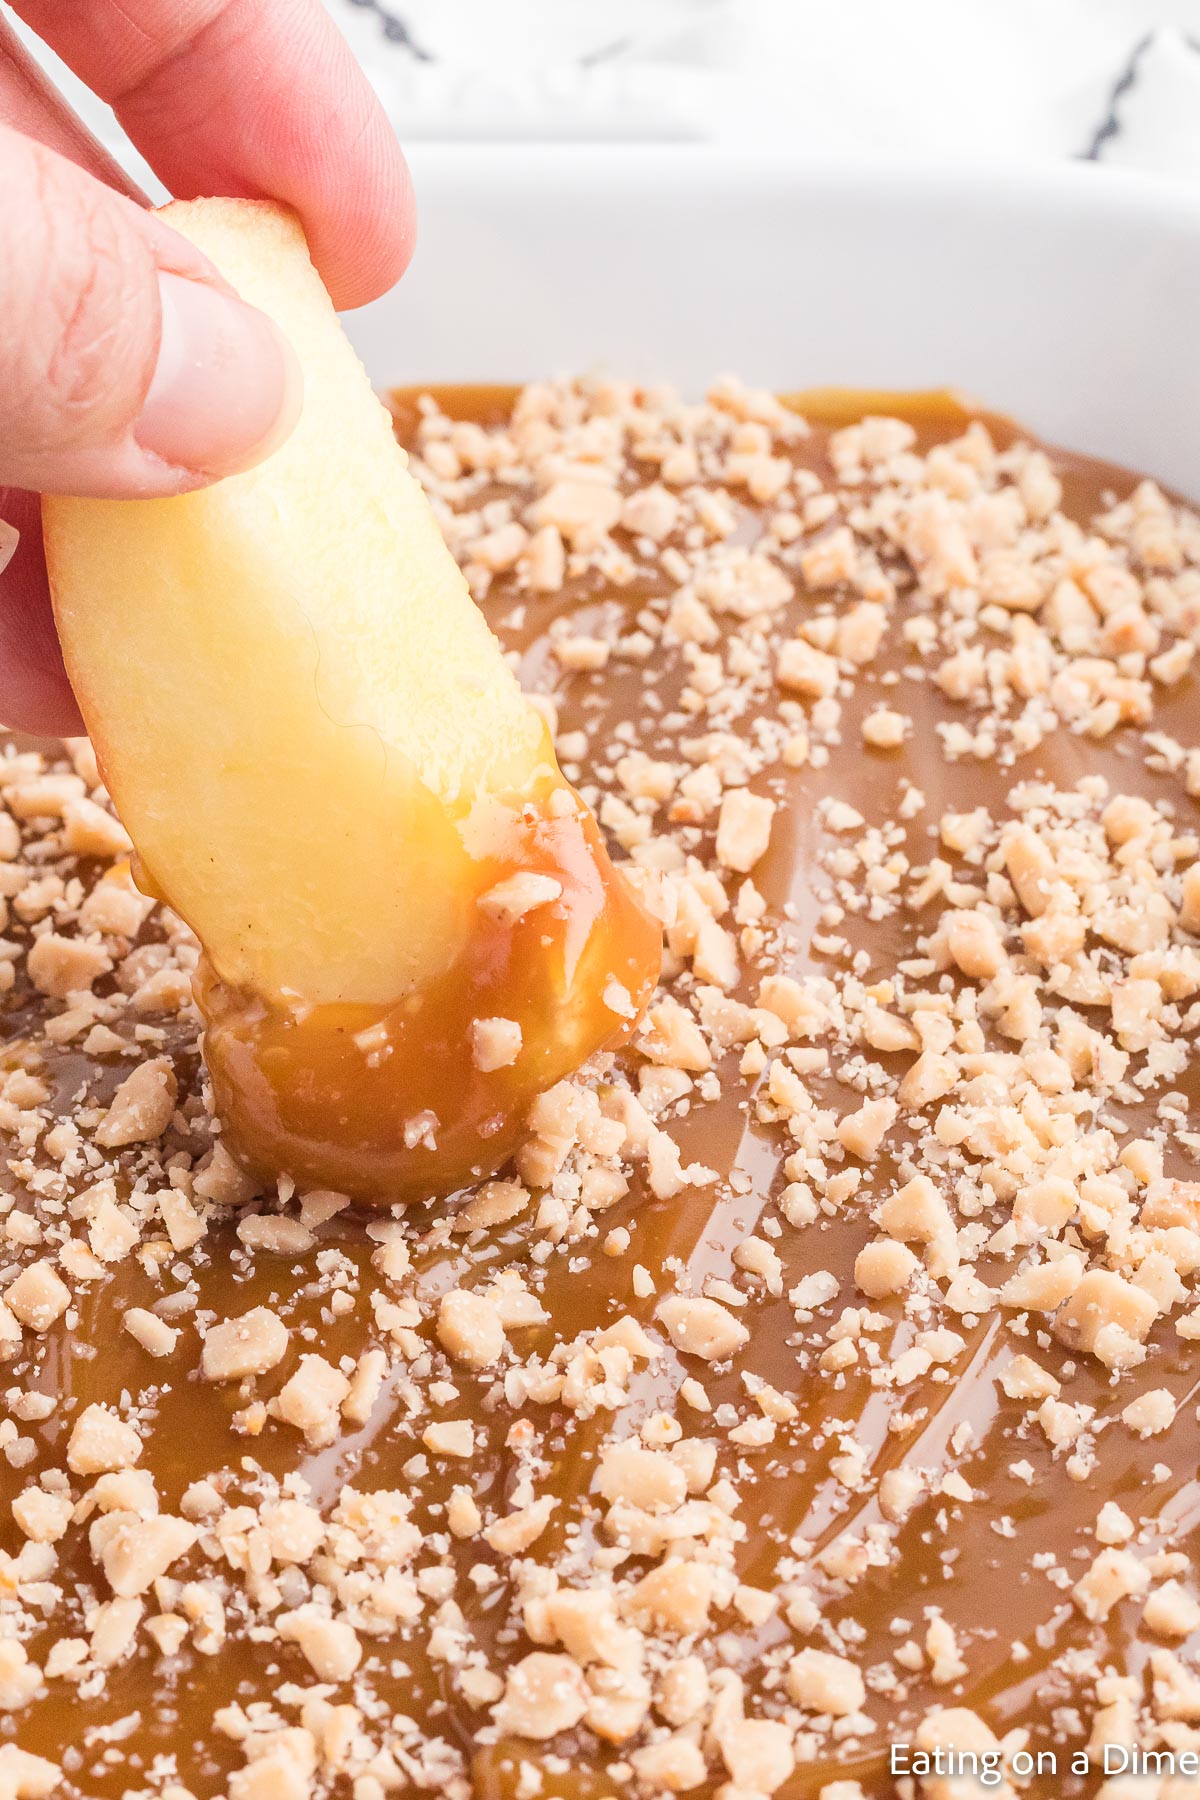 Dipping slice apples into the caramel dip